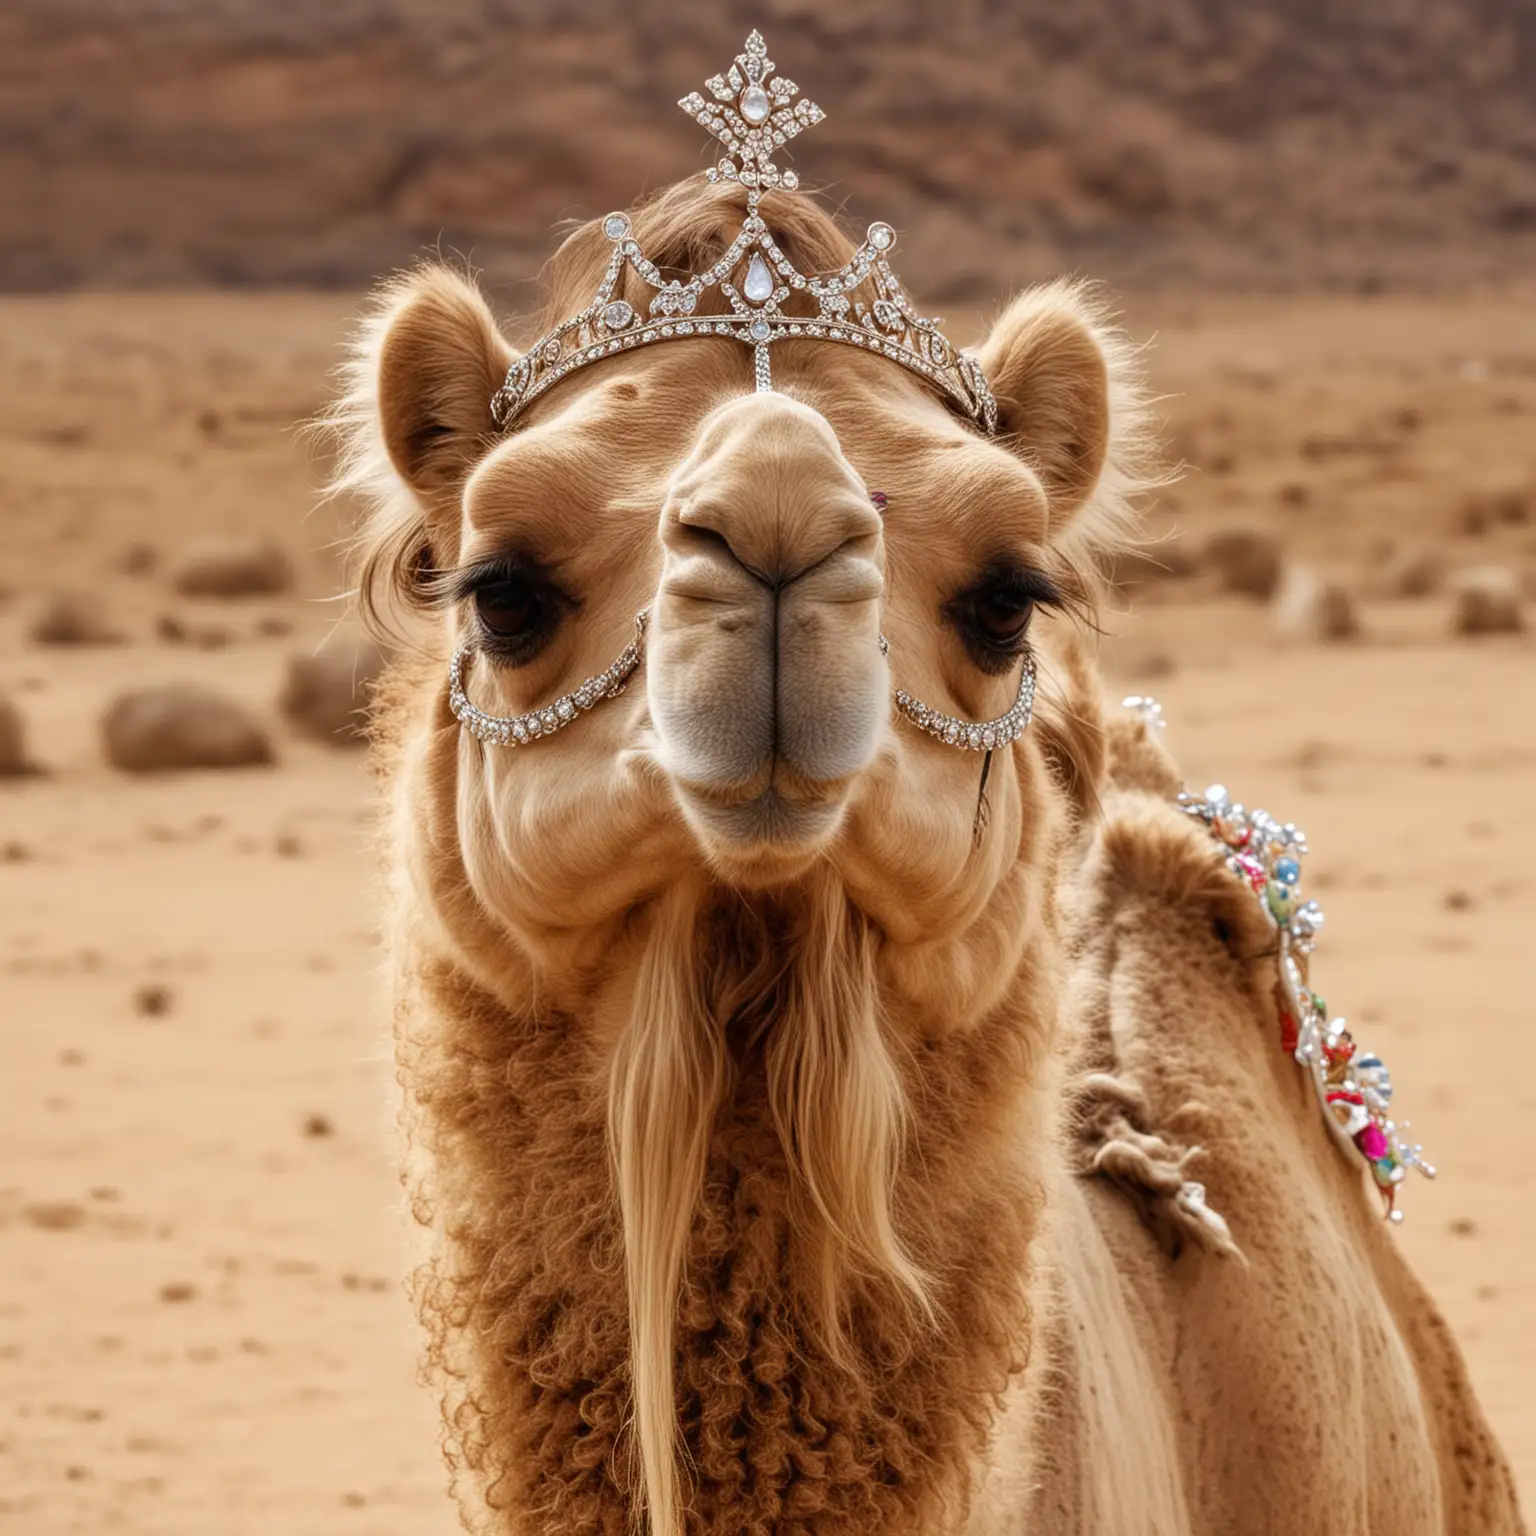 A camel with long, flowing hair wearing a tiara